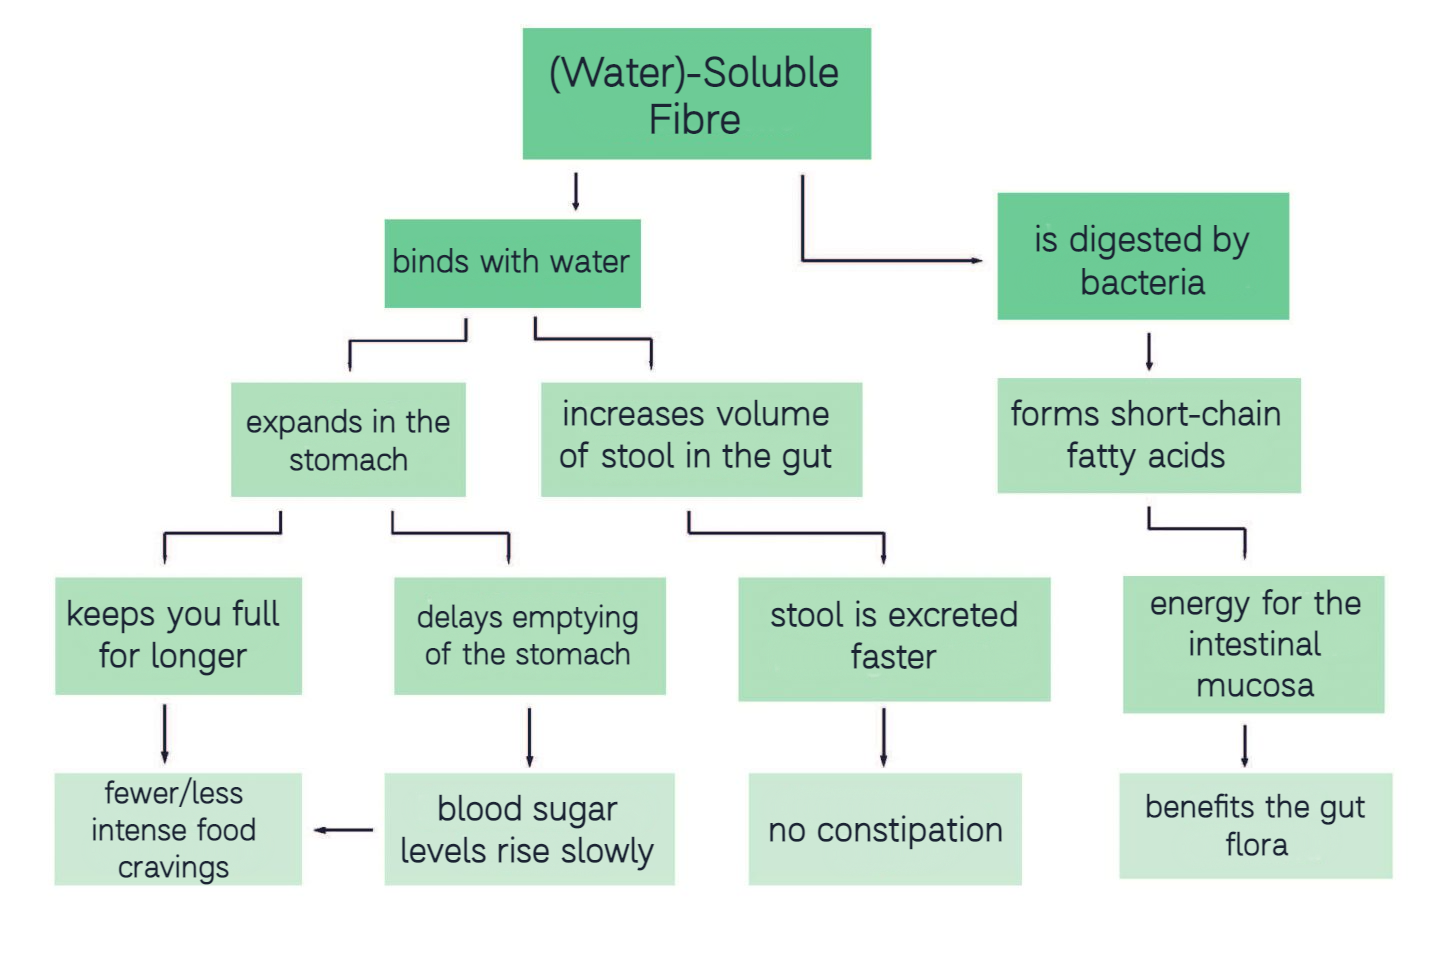 The effects of soluble fibre